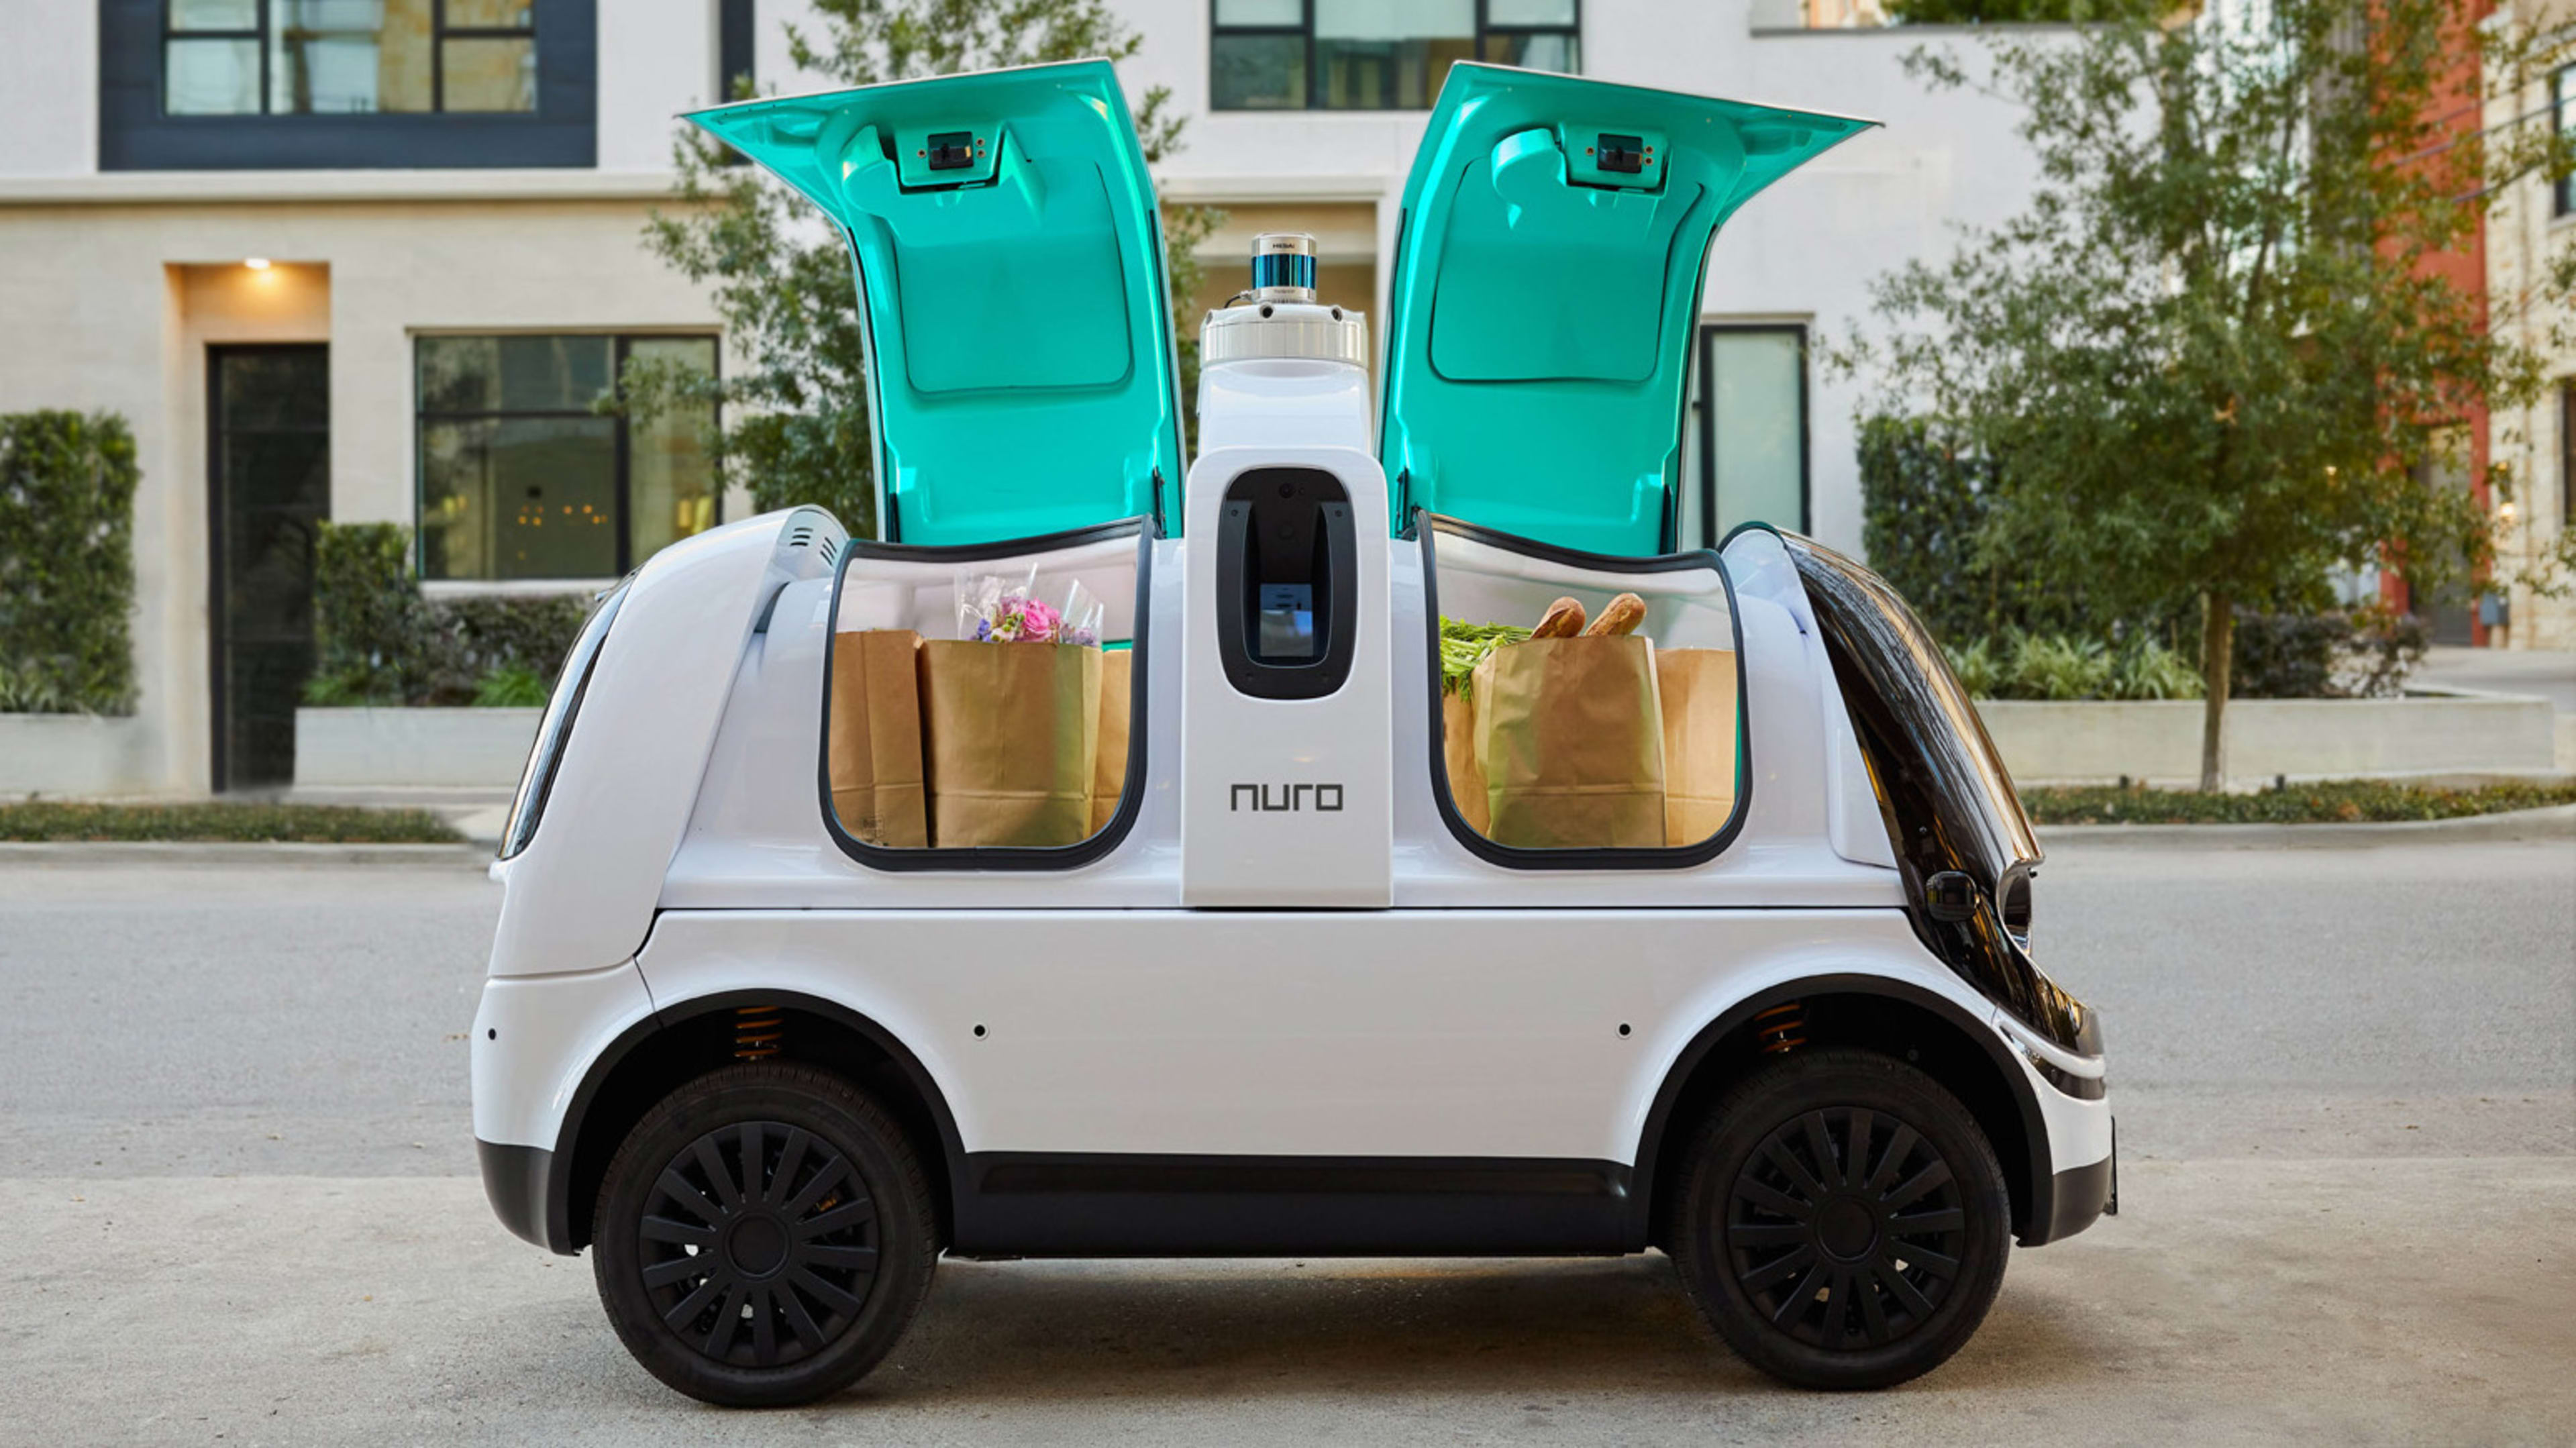 Chipotle is the latest company to get behind robot cars. Here’s why